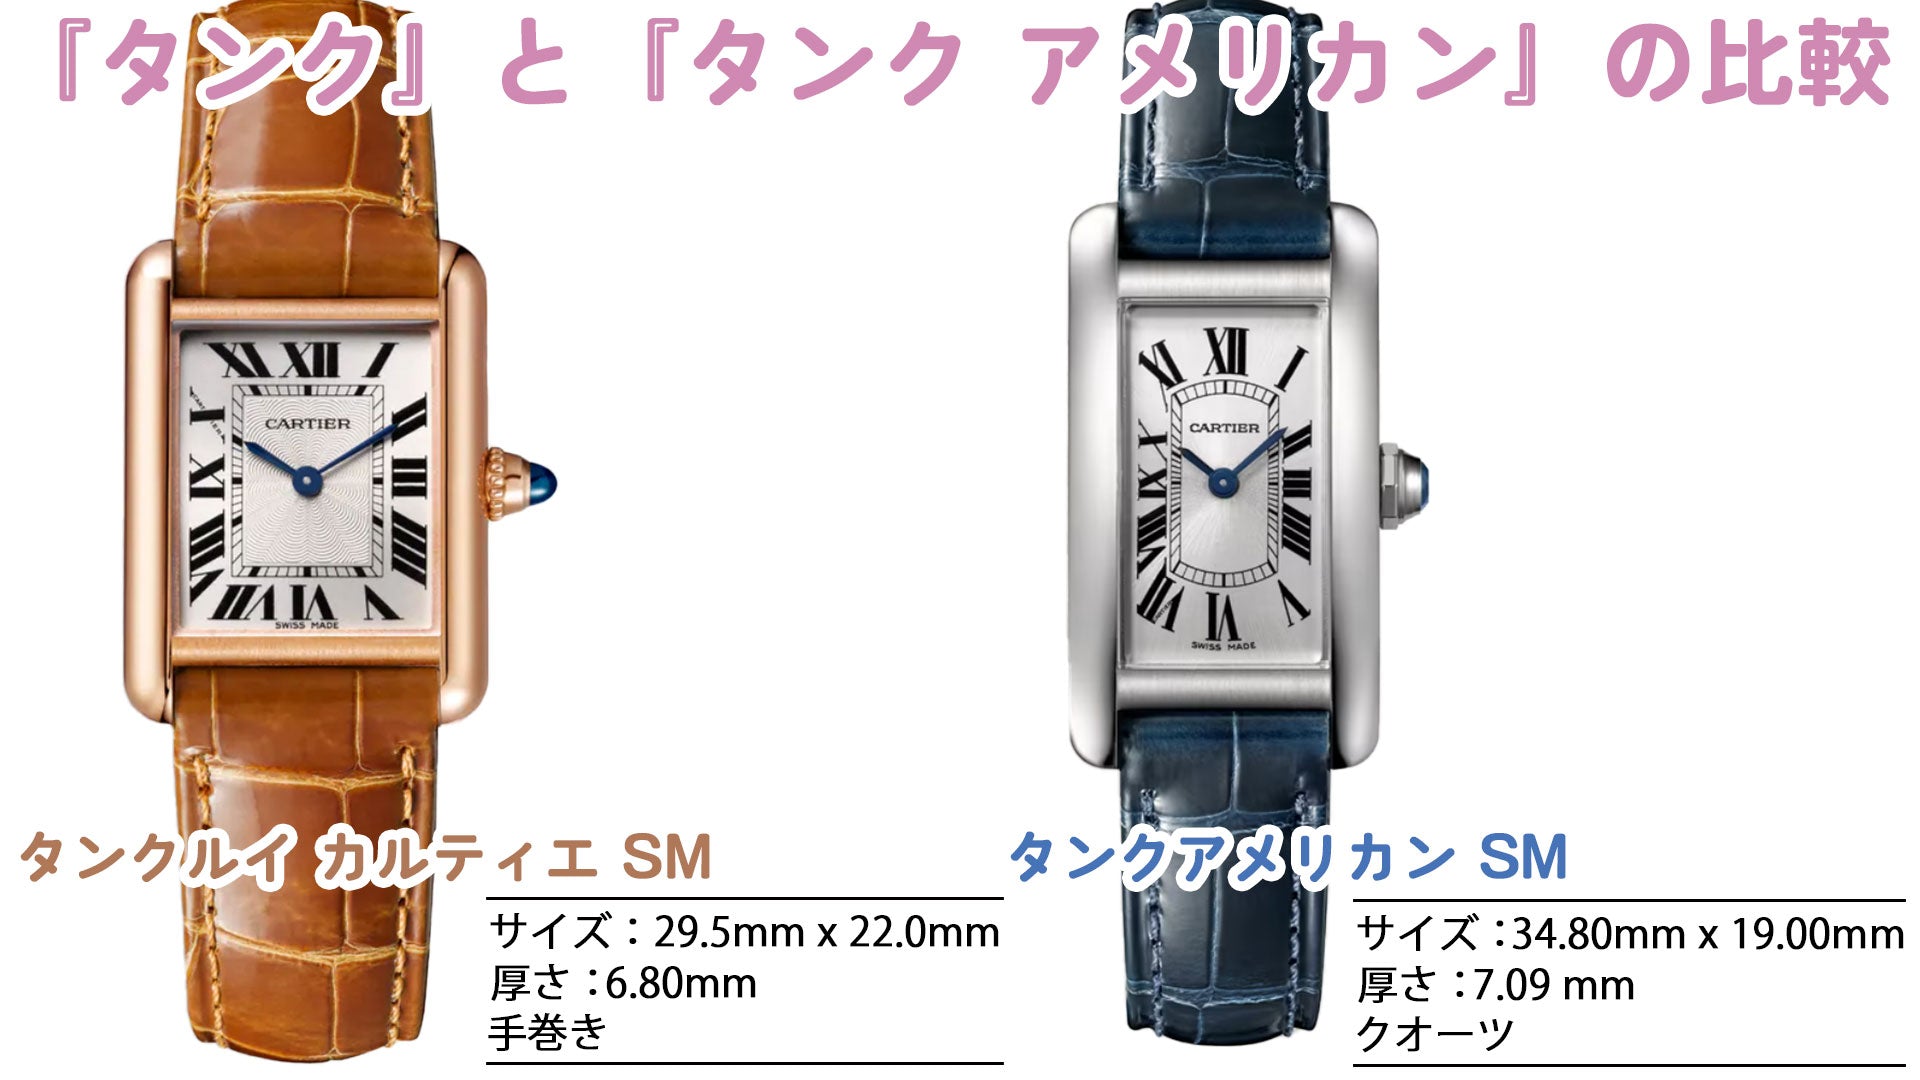 Cartier Watches: Comparison image of Tank and Tank American